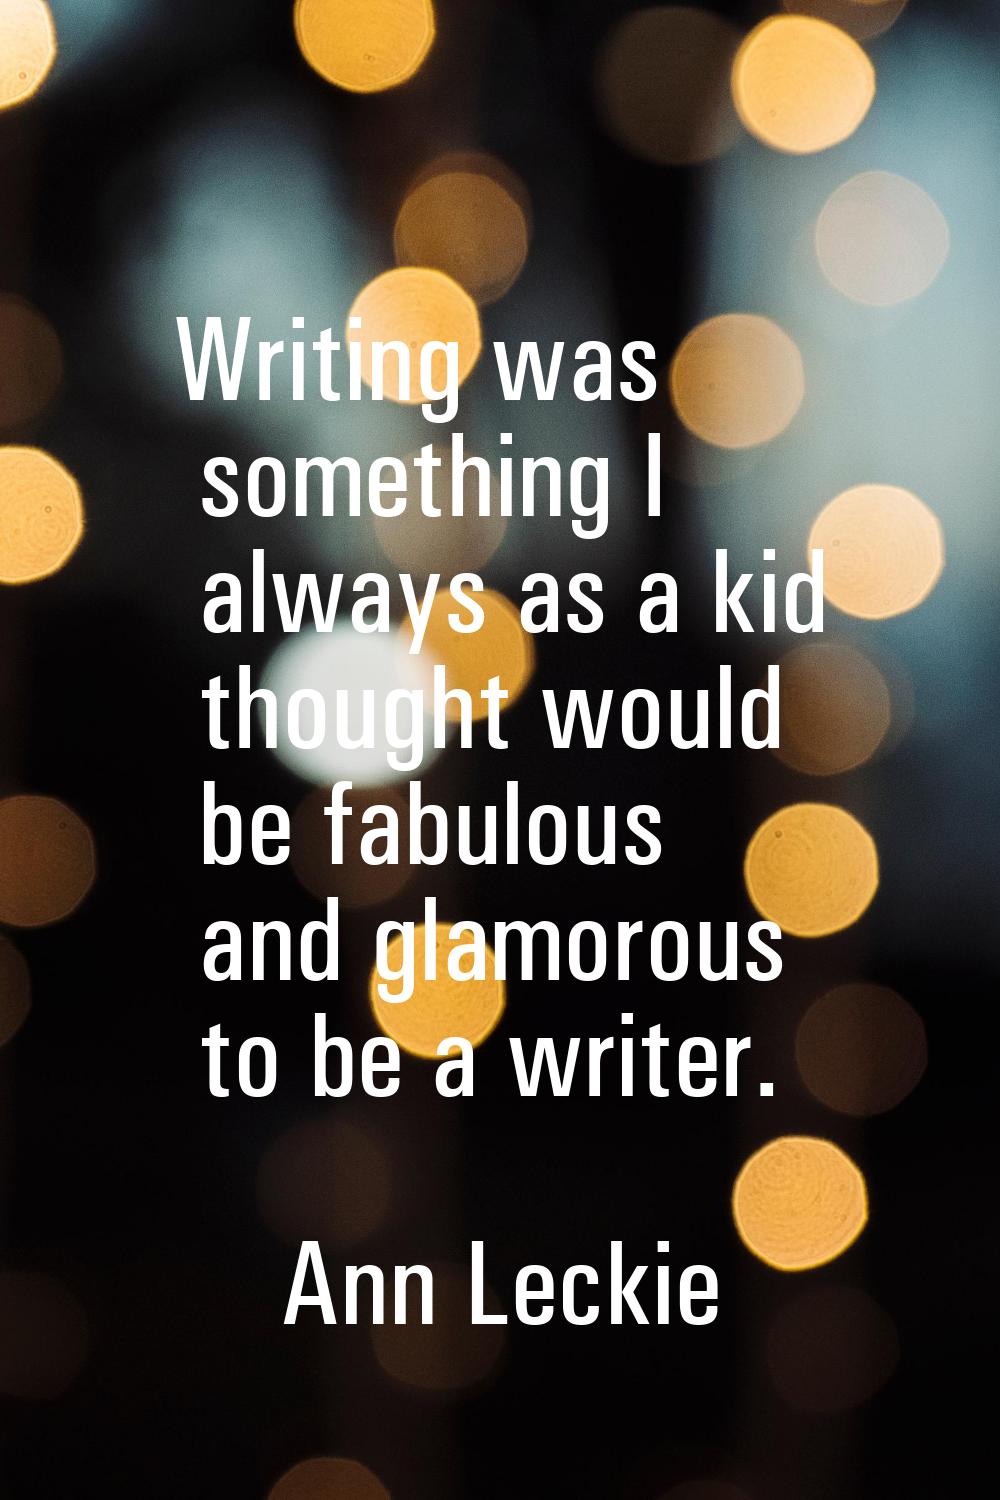 Writing was something I always as a kid thought would be fabulous and glamorous to be a writer.